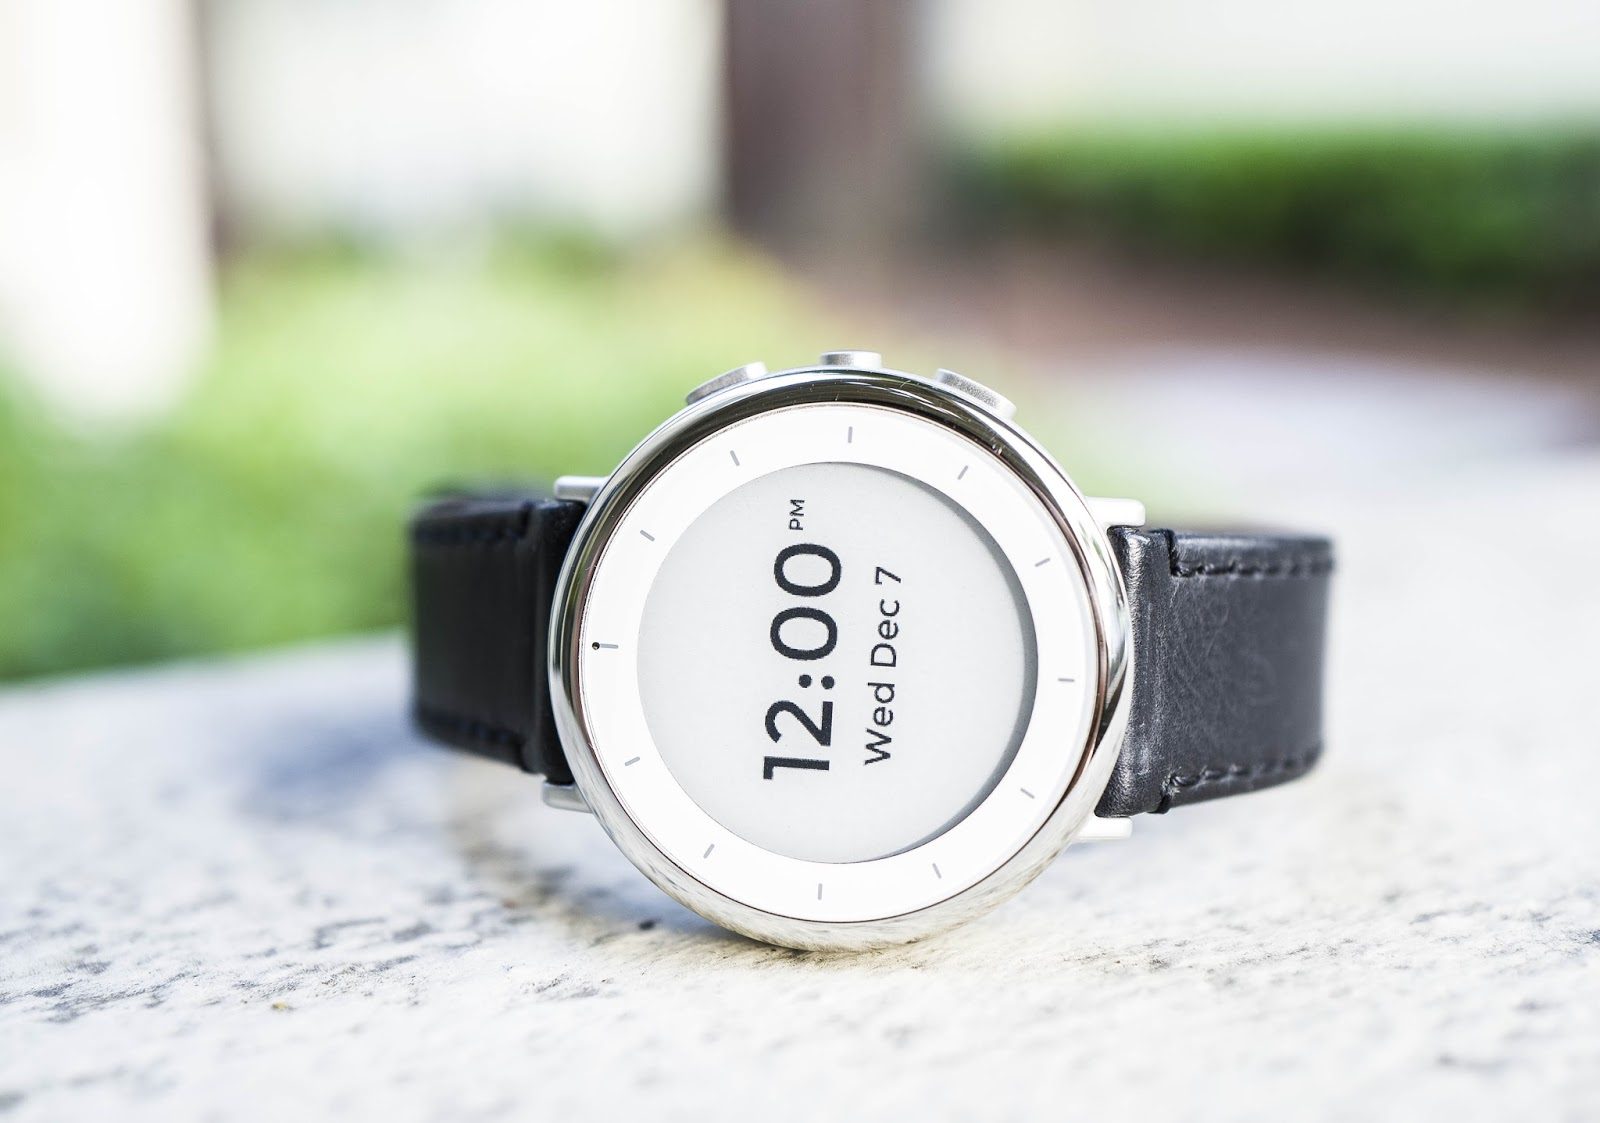 Alphabet’s Verily makes ‘Study Watch’ for health research